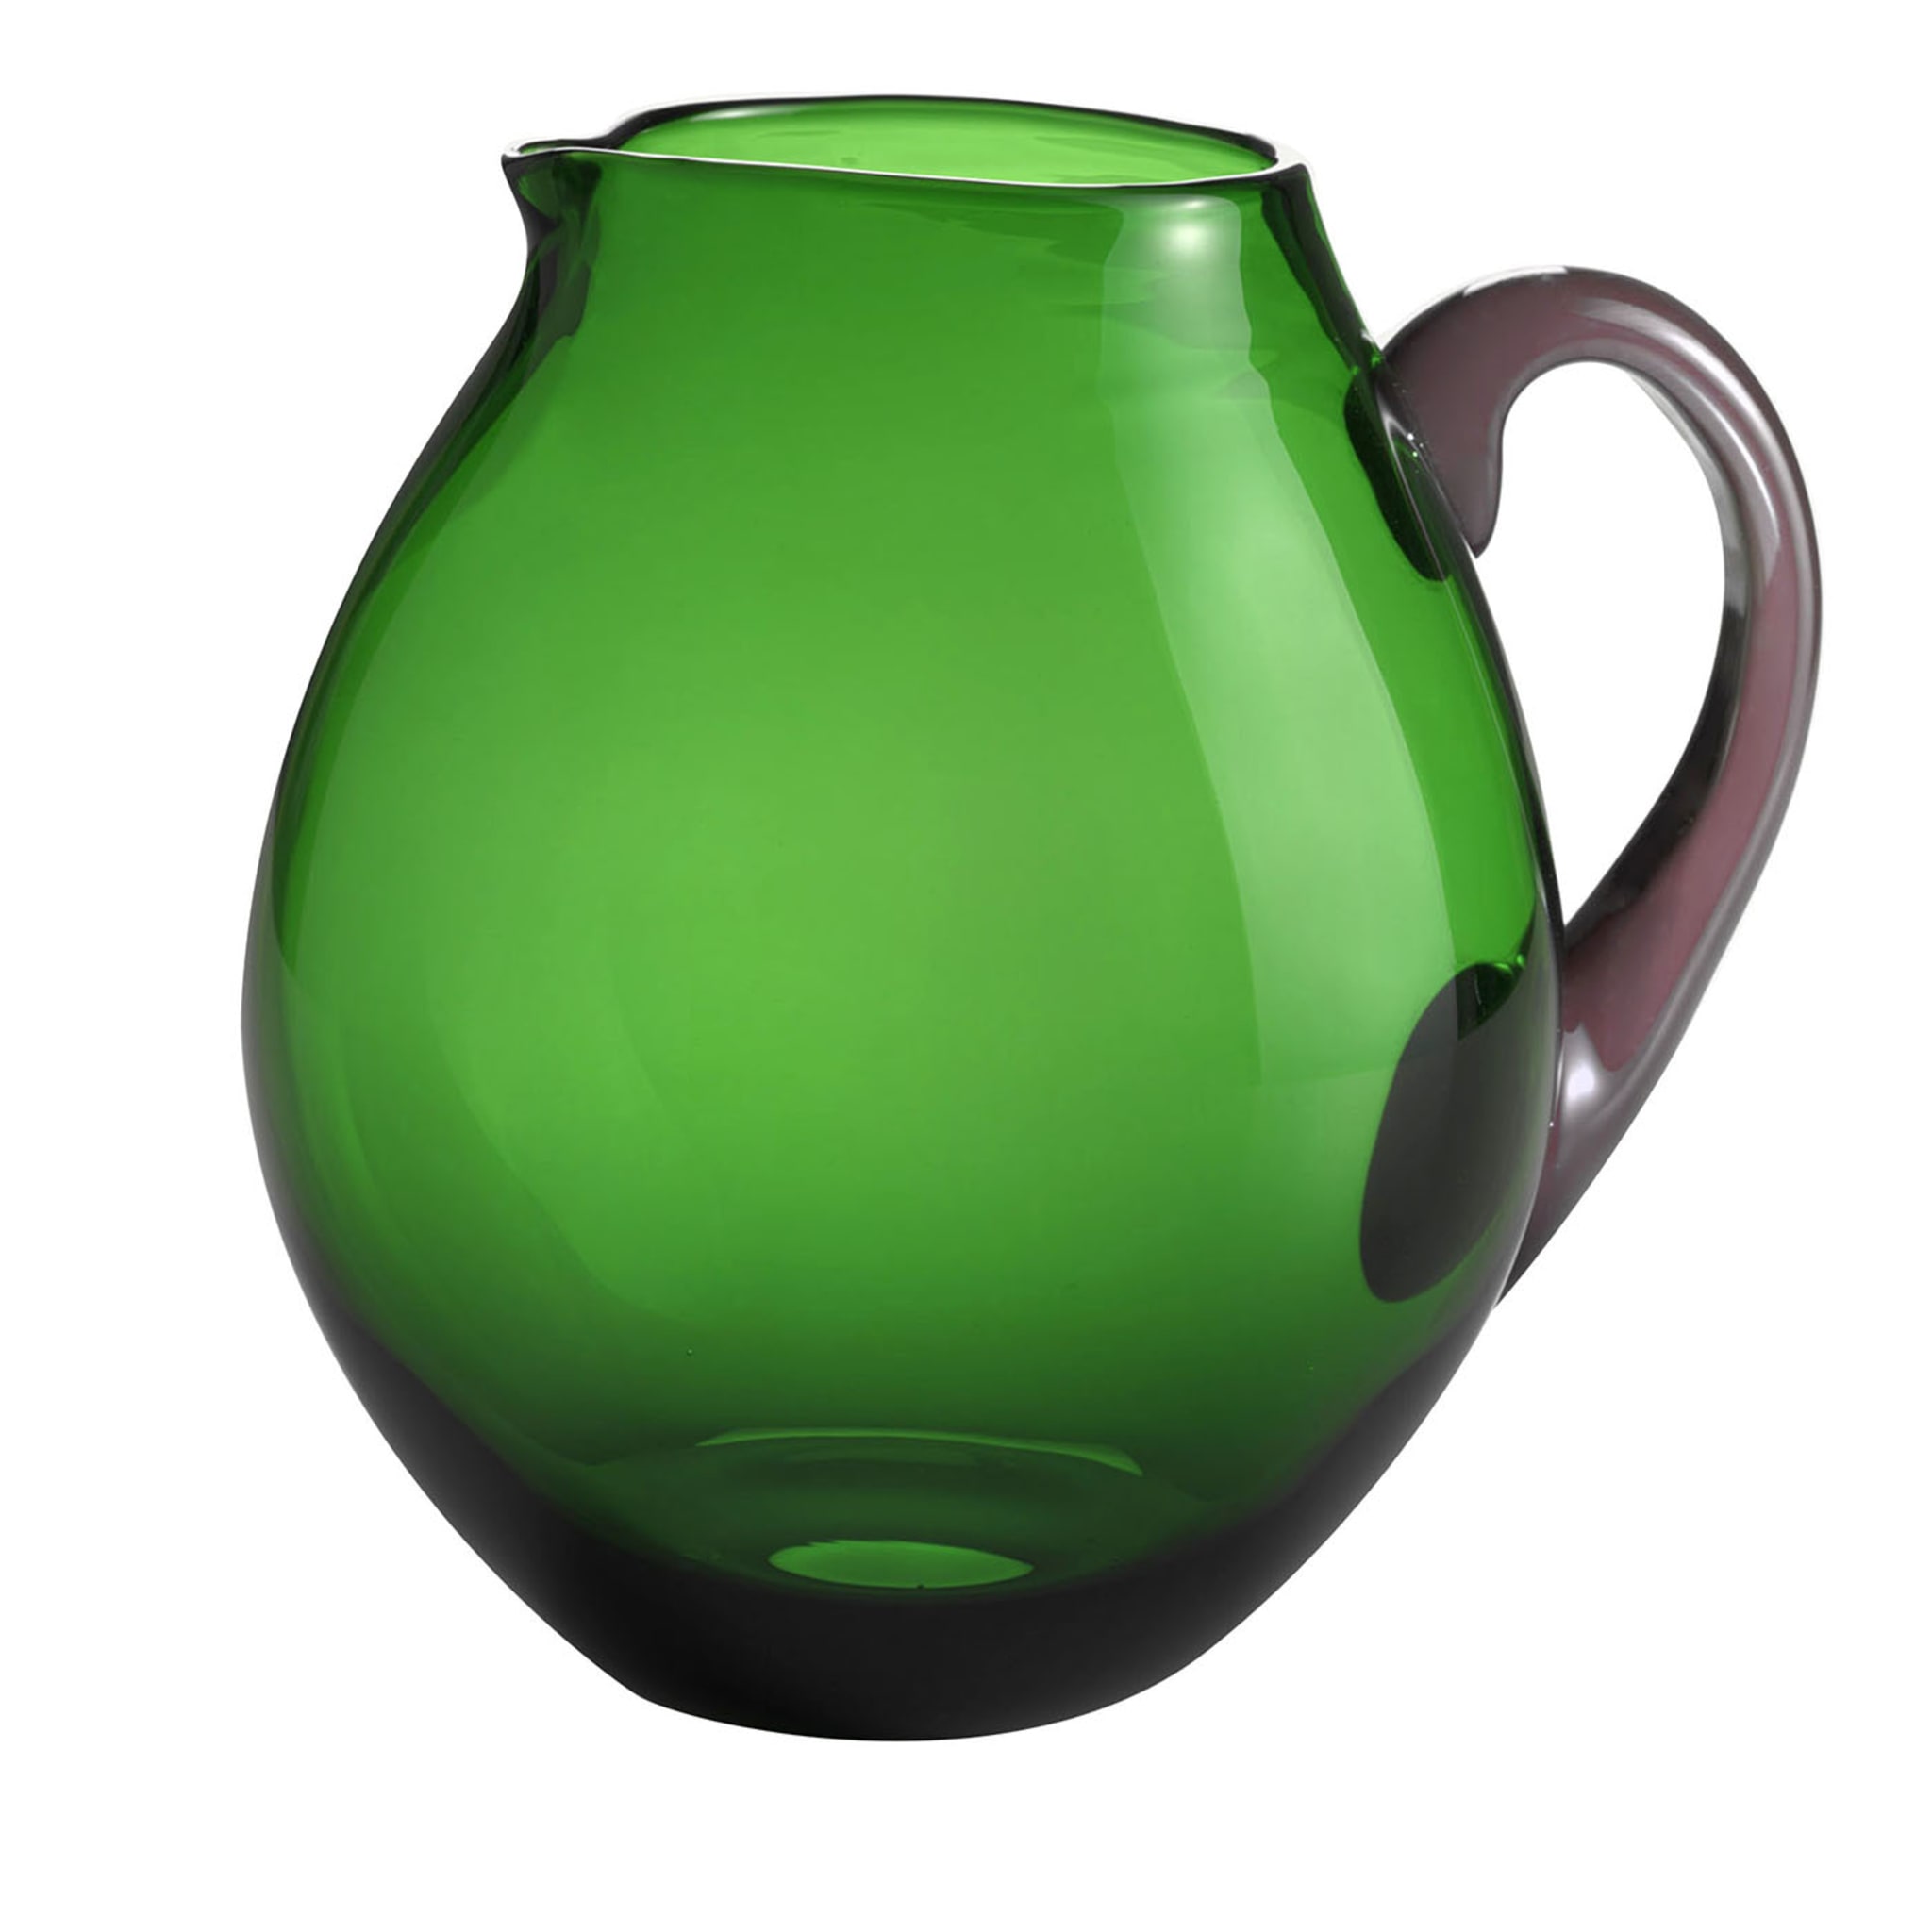 Dandy Green & Blueberry Pitcher by Stefano Marcato - Main view